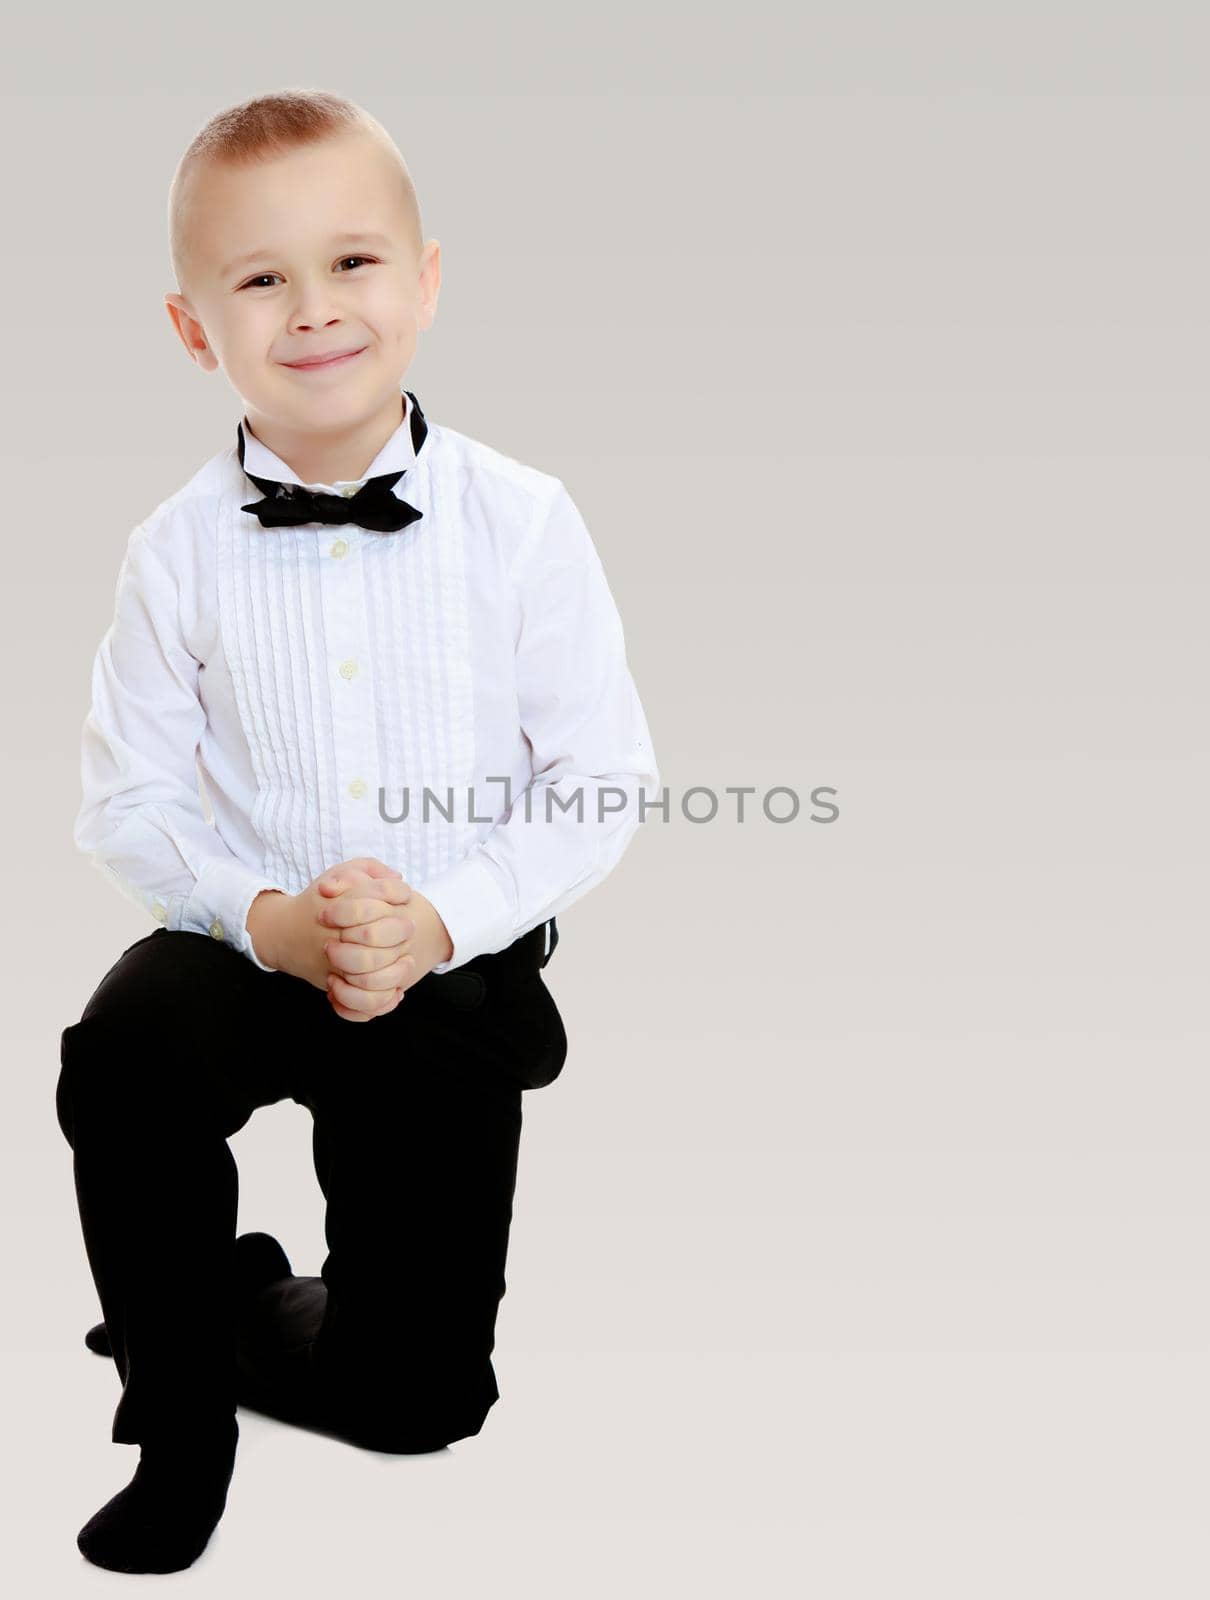 Beautiful , elegant little boy in black pants , white shirt and black tie.On a gray background.